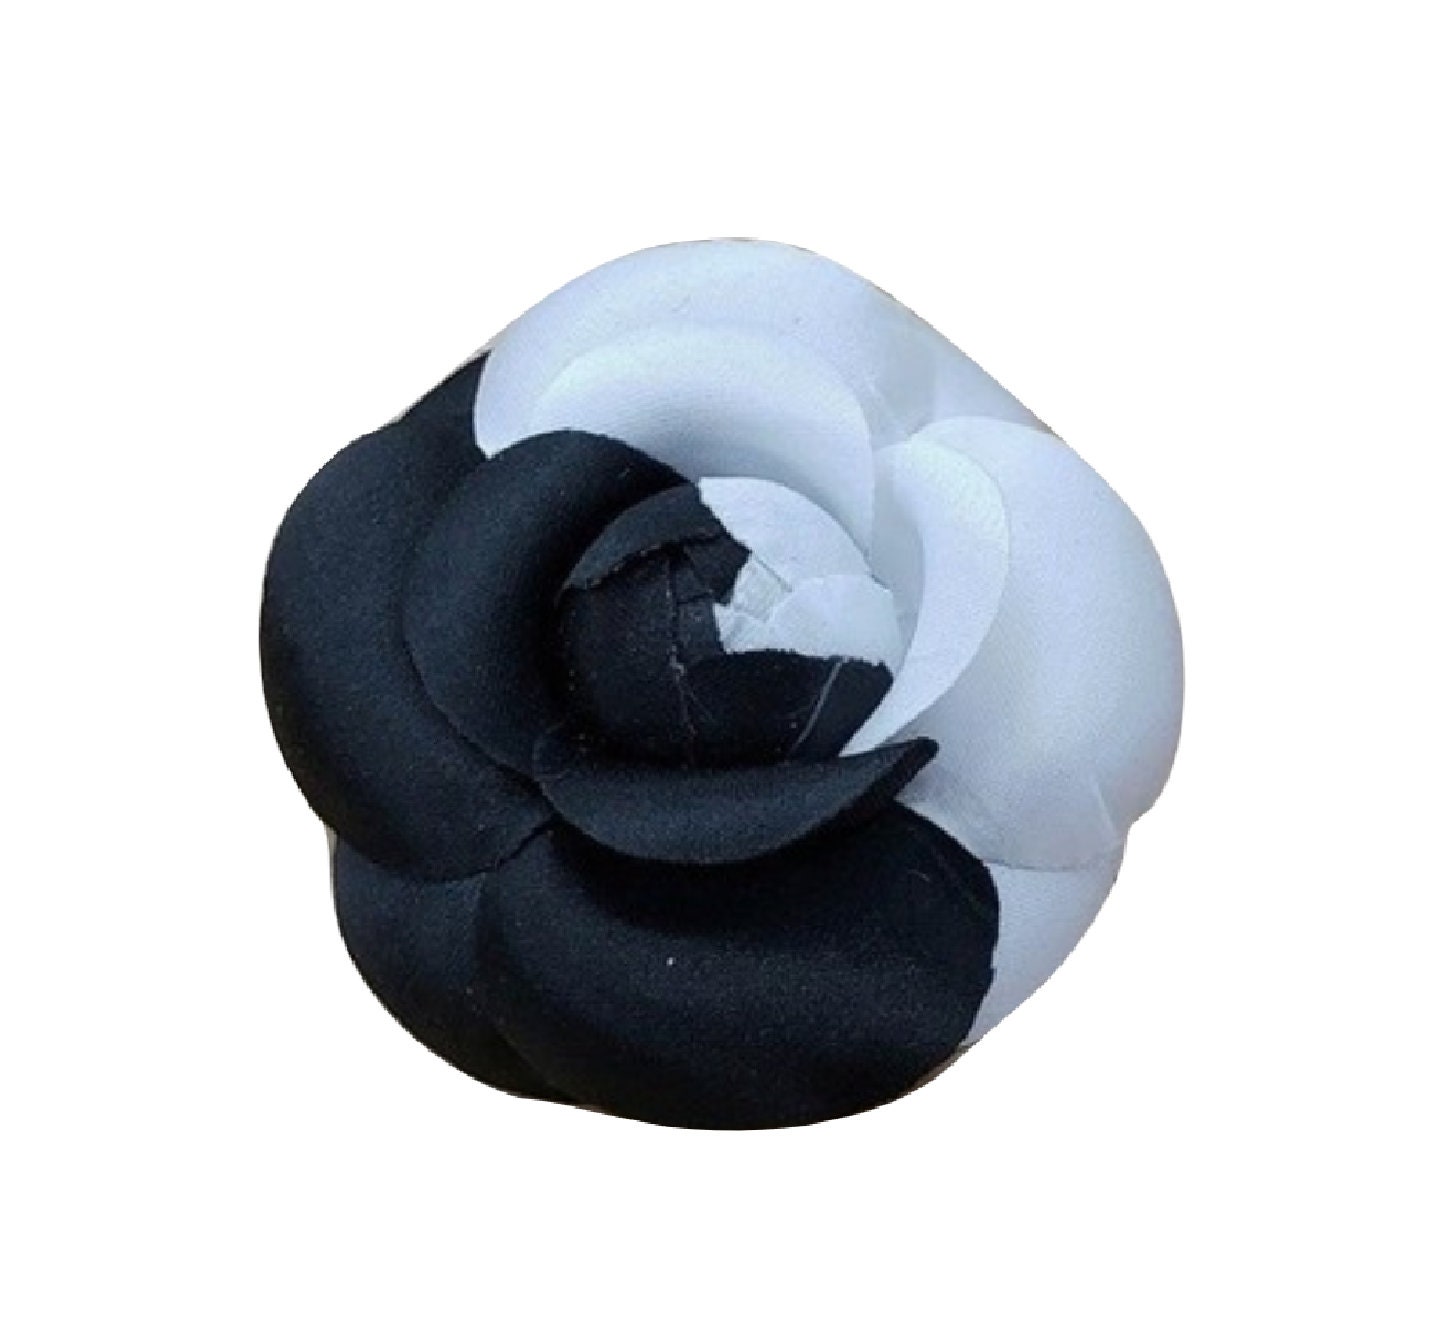  M&S Schmalberg Handmade White Camellia Brooch Pin - Elegant  Silk Fabric Flower Accessory, American-Made in New York's Garment Center:  Brooches And Pins: Clothing, Shoes & Jewelry